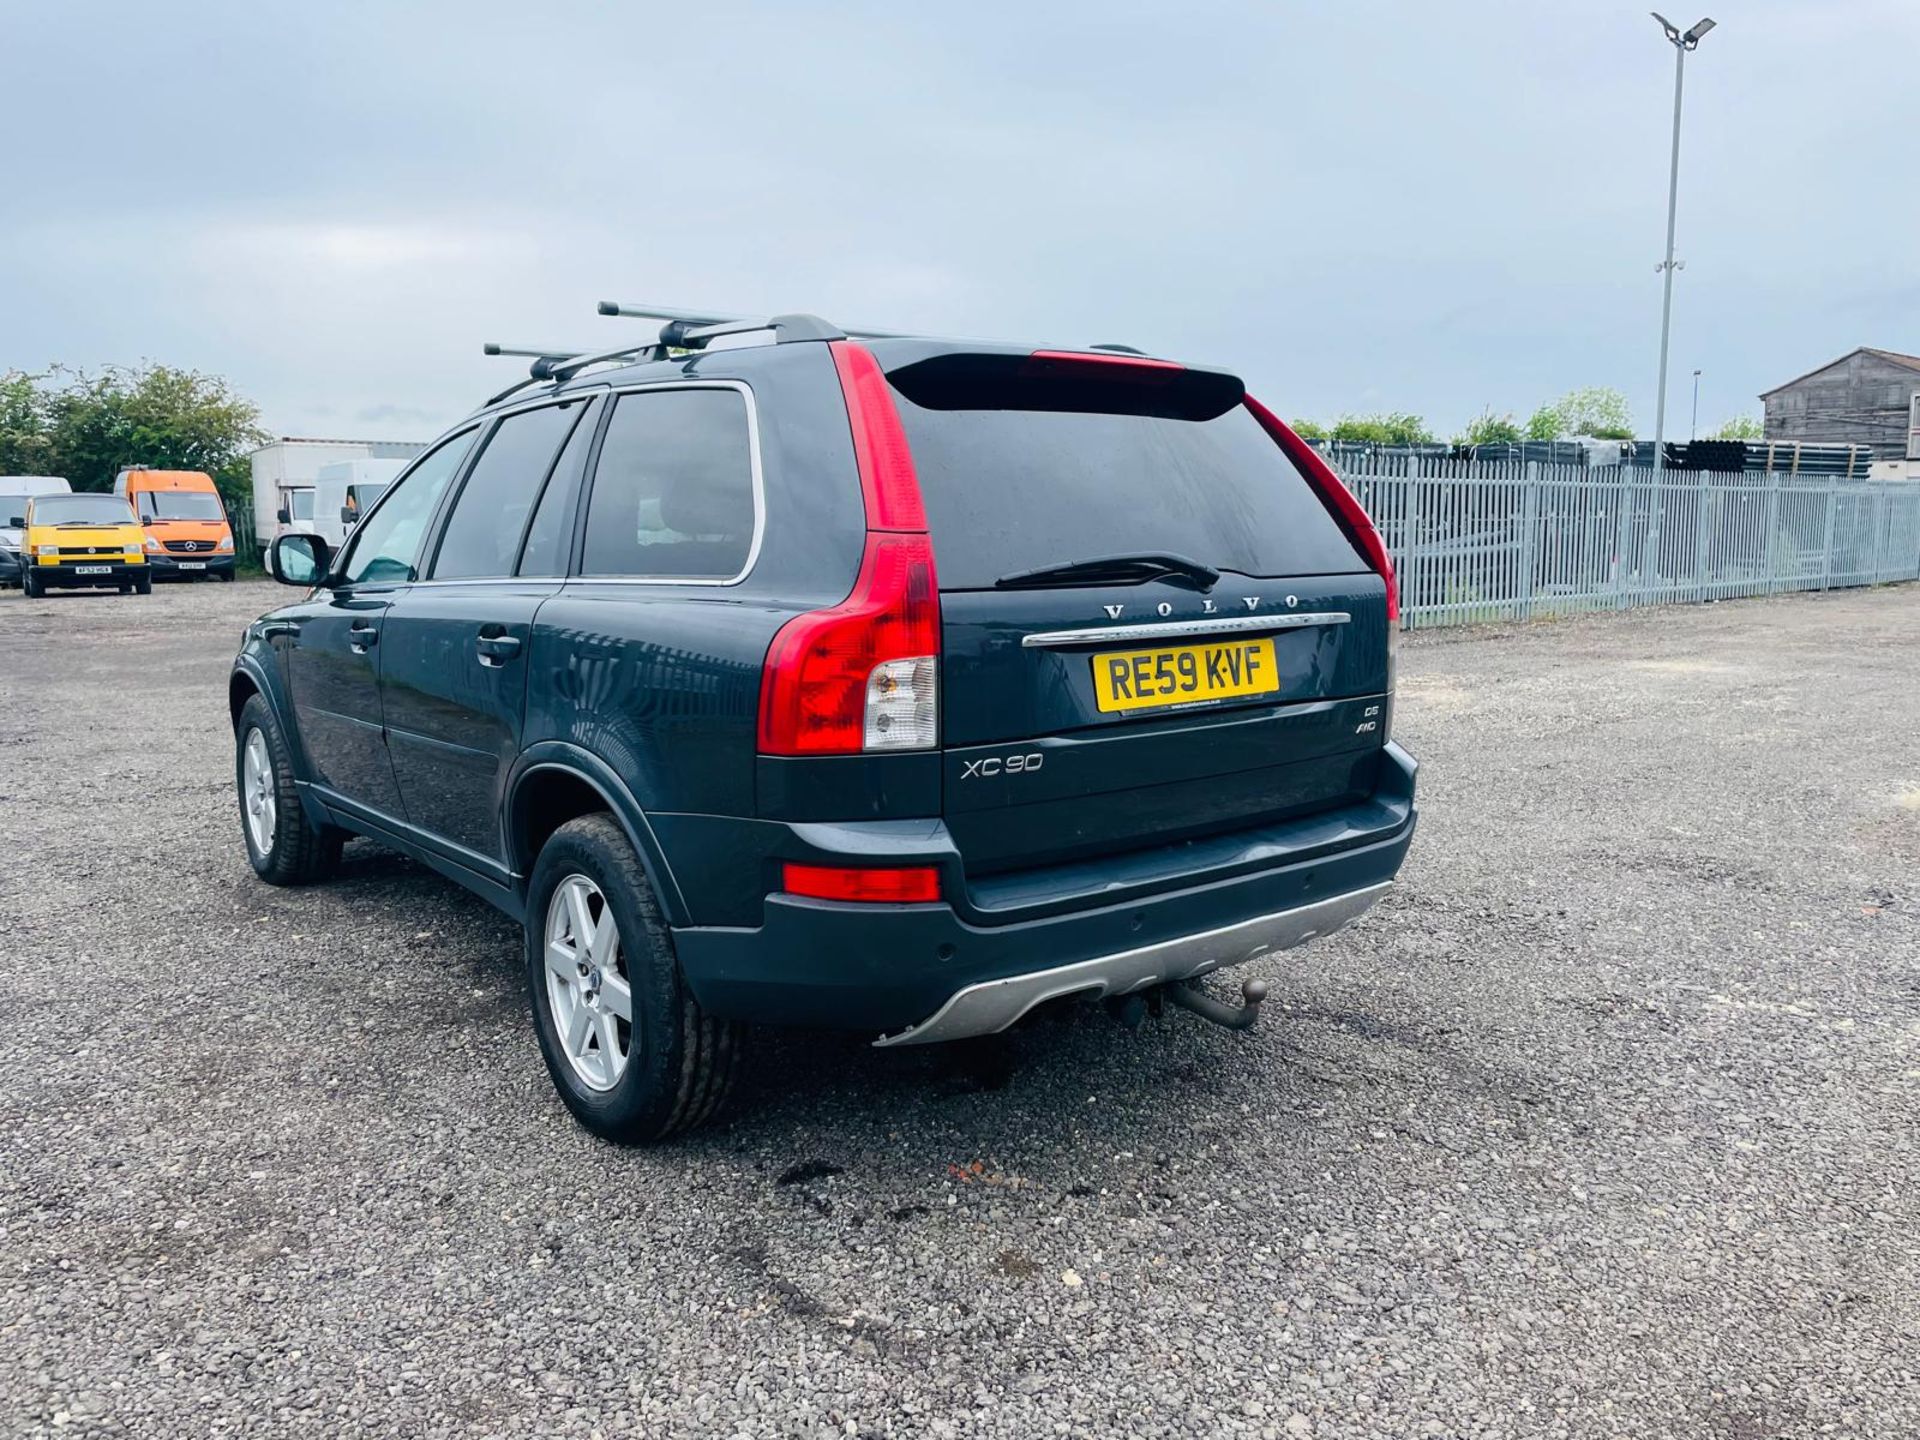 Volvo XC90 D5 185 Active 2.4 2009 '59 Reg' -7 Seats-Air Conditioning-Power Mirrors-Automatic-No Vat - Image 5 of 34